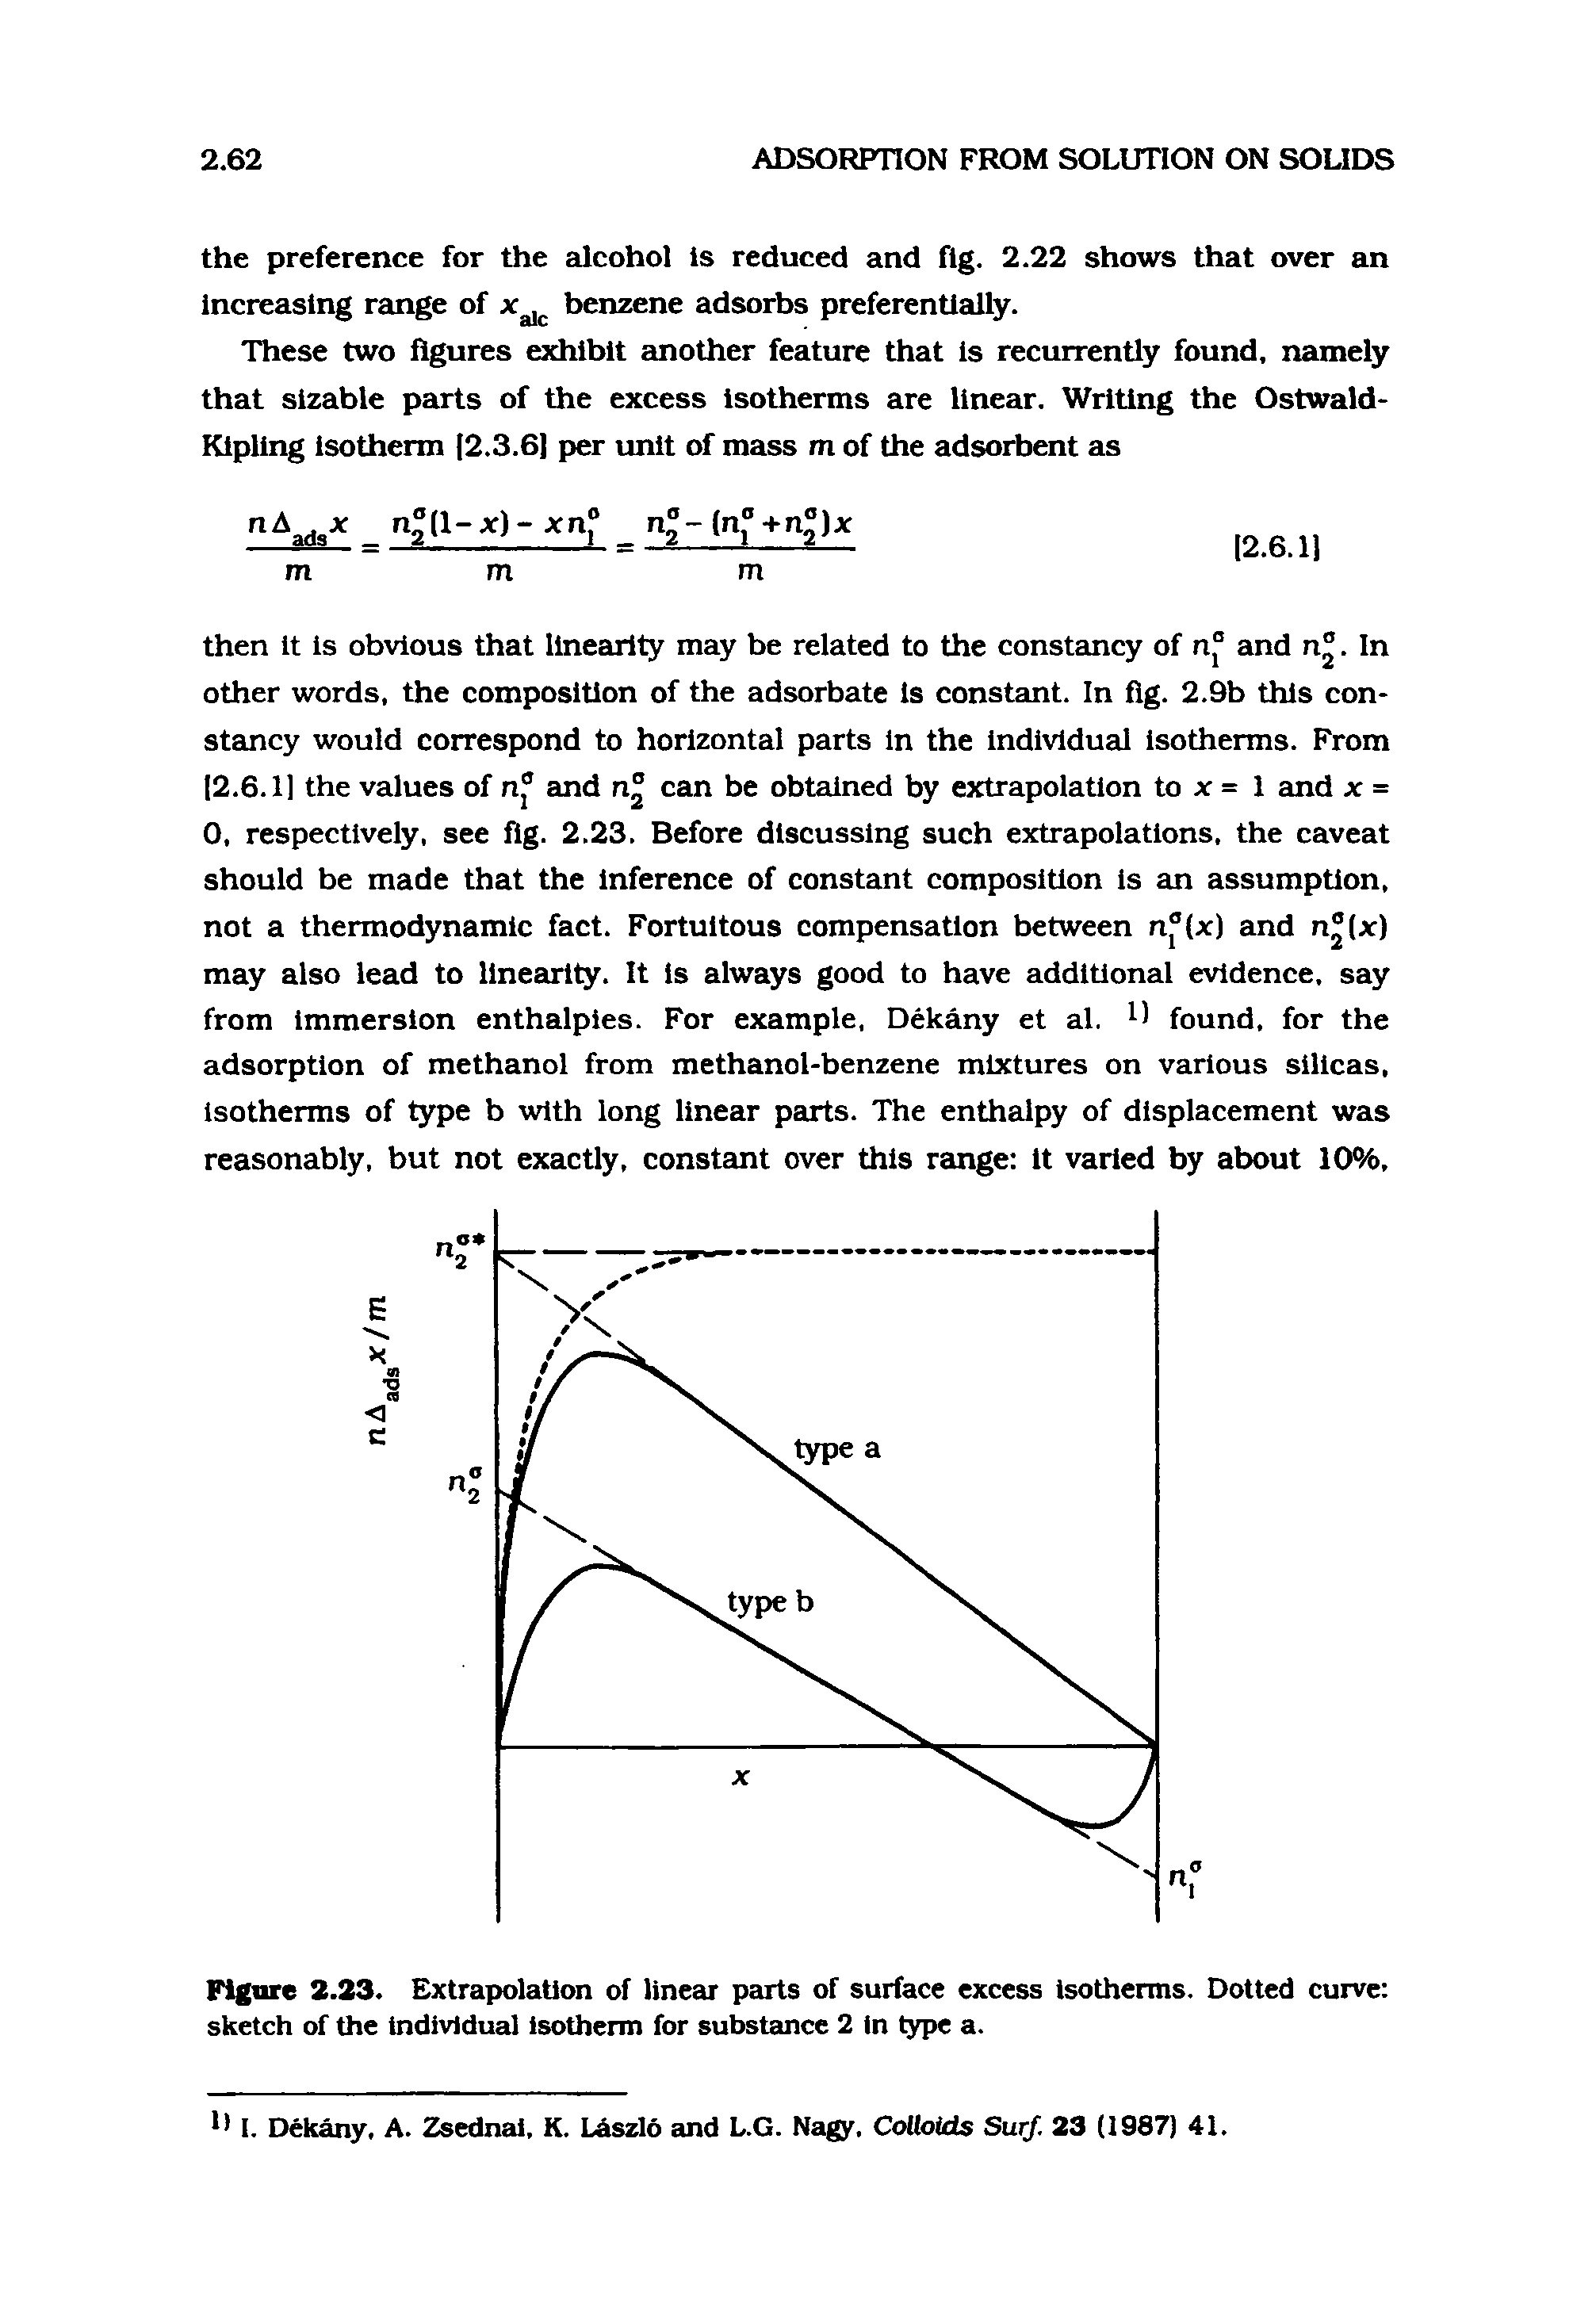 Figure 2.23. Extrapolation of linear parts of surface excess isotherms. Dotted curve sketch of the individual isotherm for substance 2 in type a.